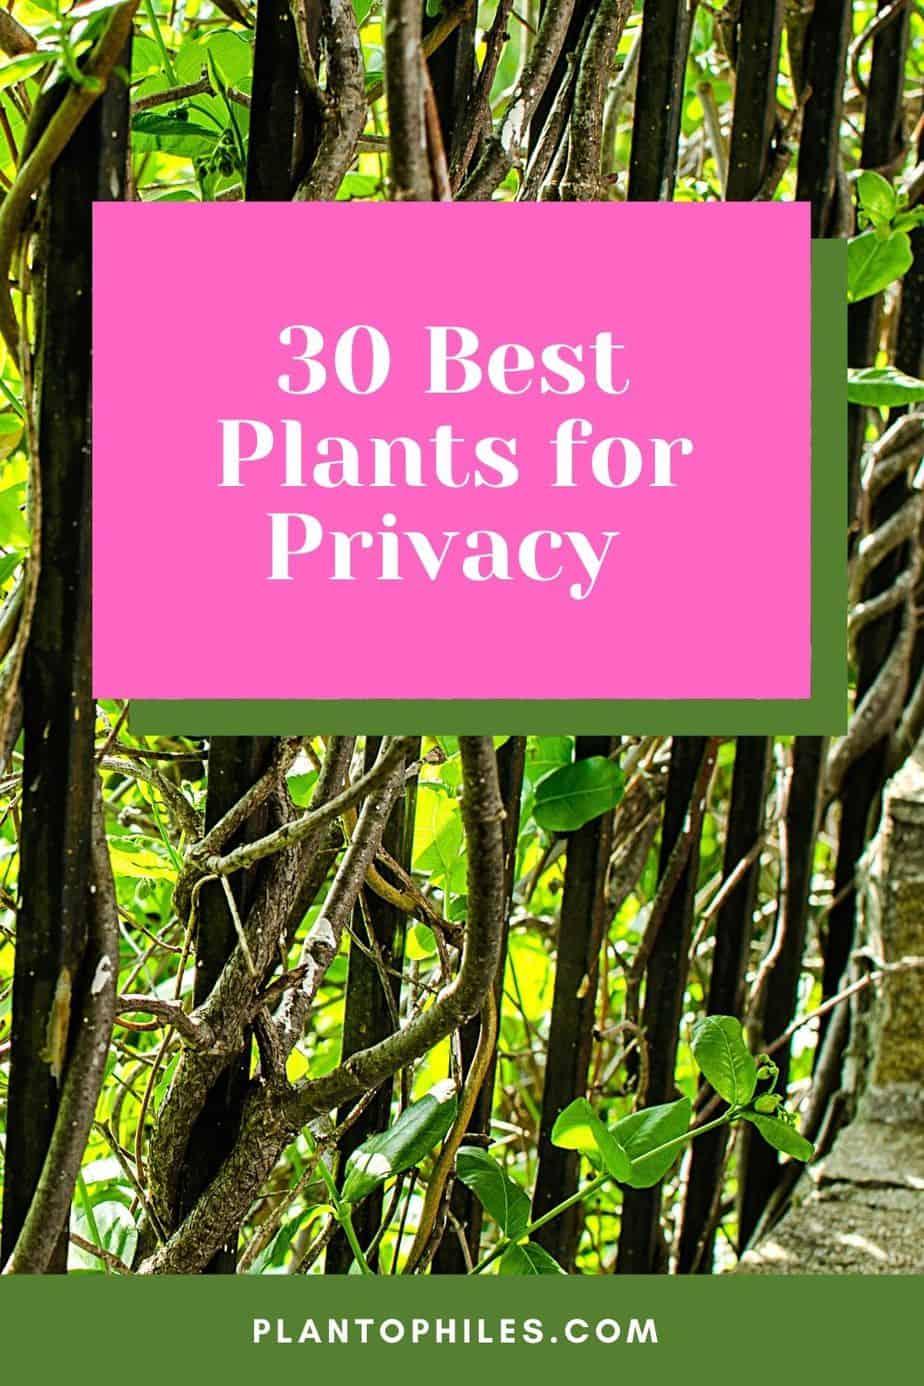 30 Best Plants for Privacy